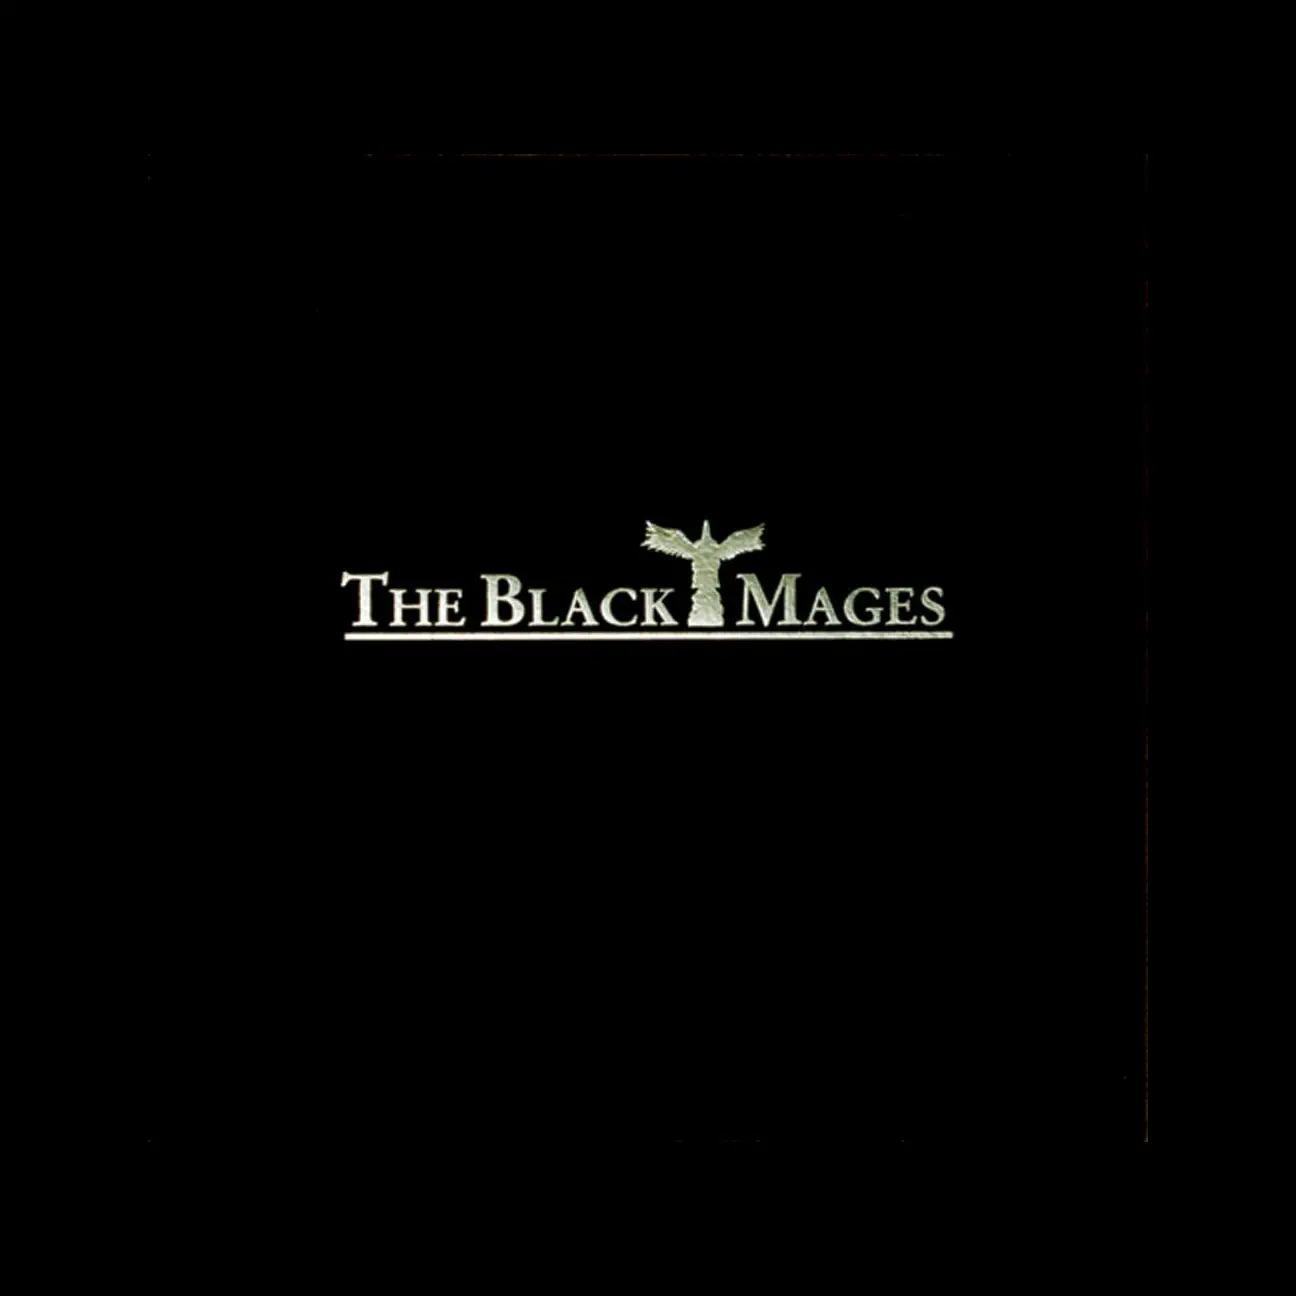 THE BLACK MAGES